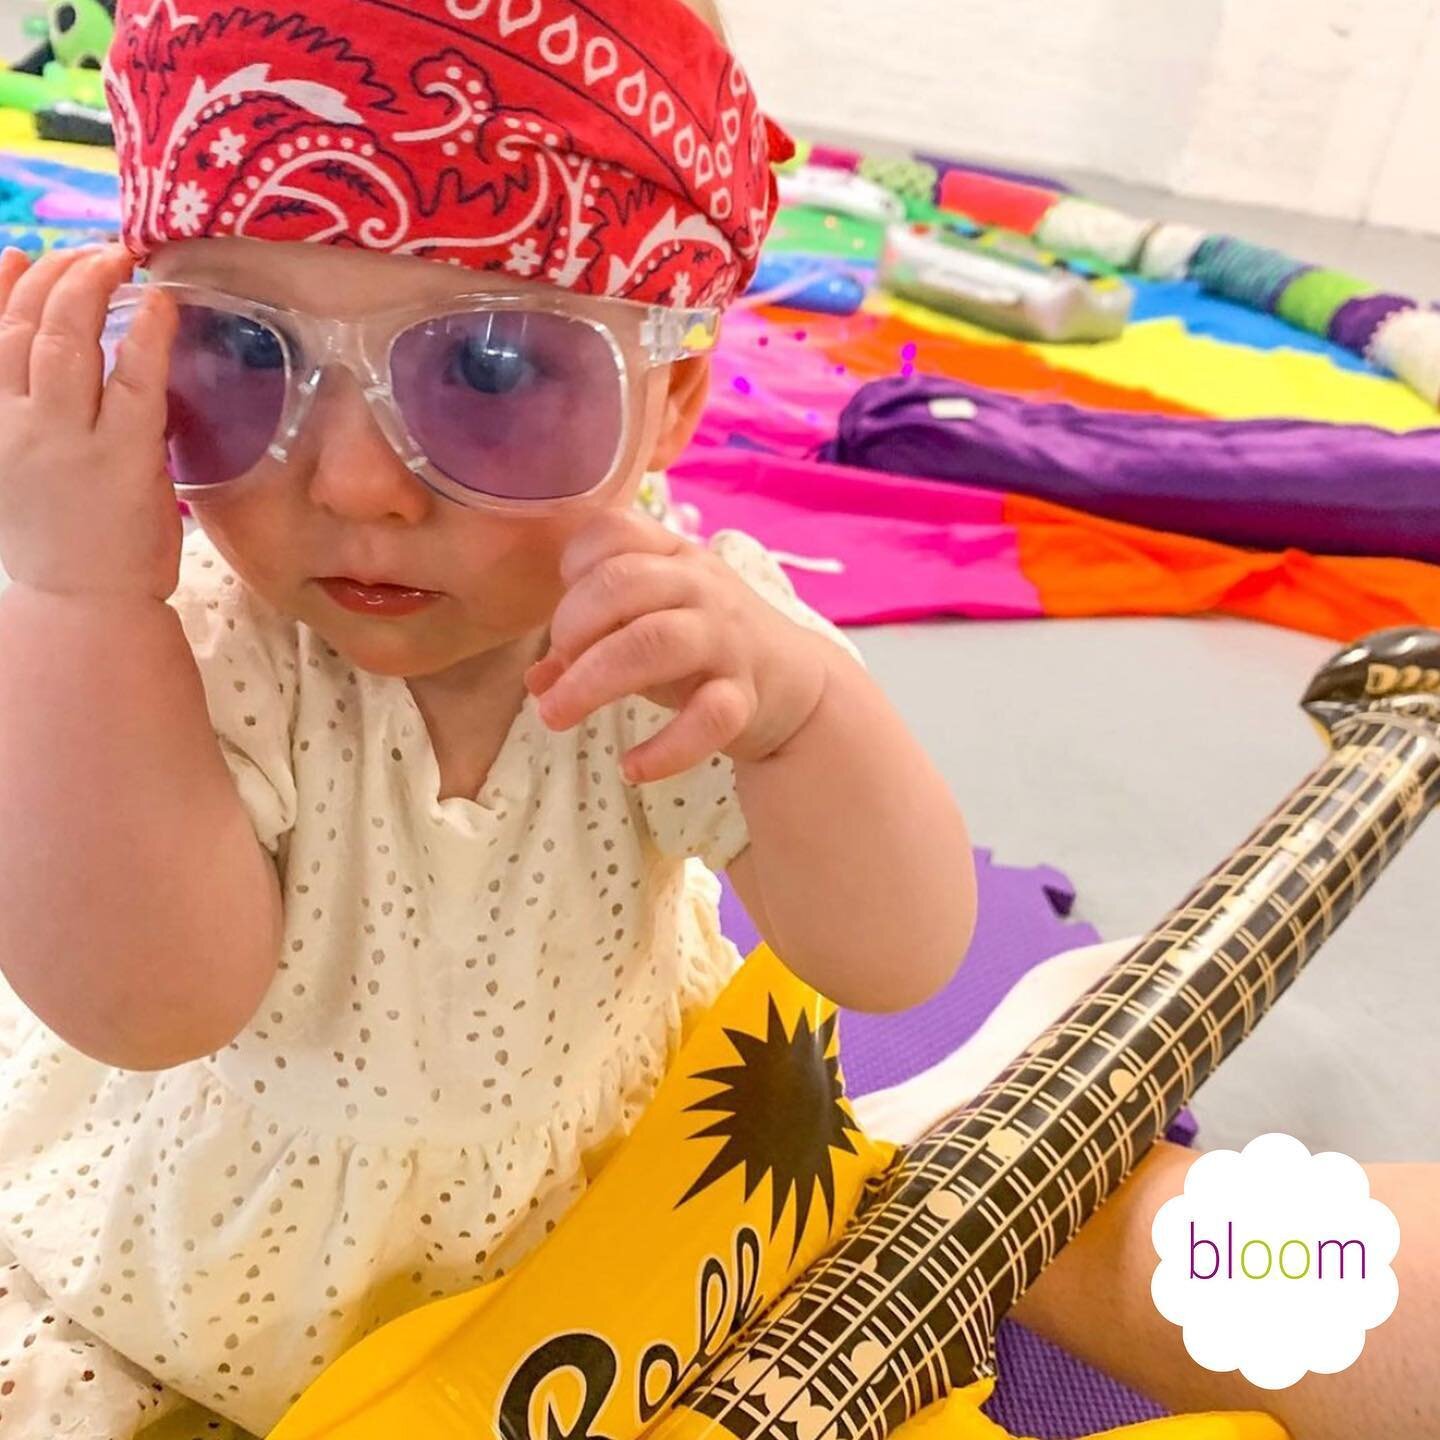 Double tap if you&rsquo;ve ordered some weekend vibes 🌈
.
.
.
.
.
.
.
#weekendiscalling #weekendvibesonathursday #weekendvibes #rockout #bloombabyclasses #bloombabyrock #babyrockstar #babythemes #sensoryplay #bestbabyclass